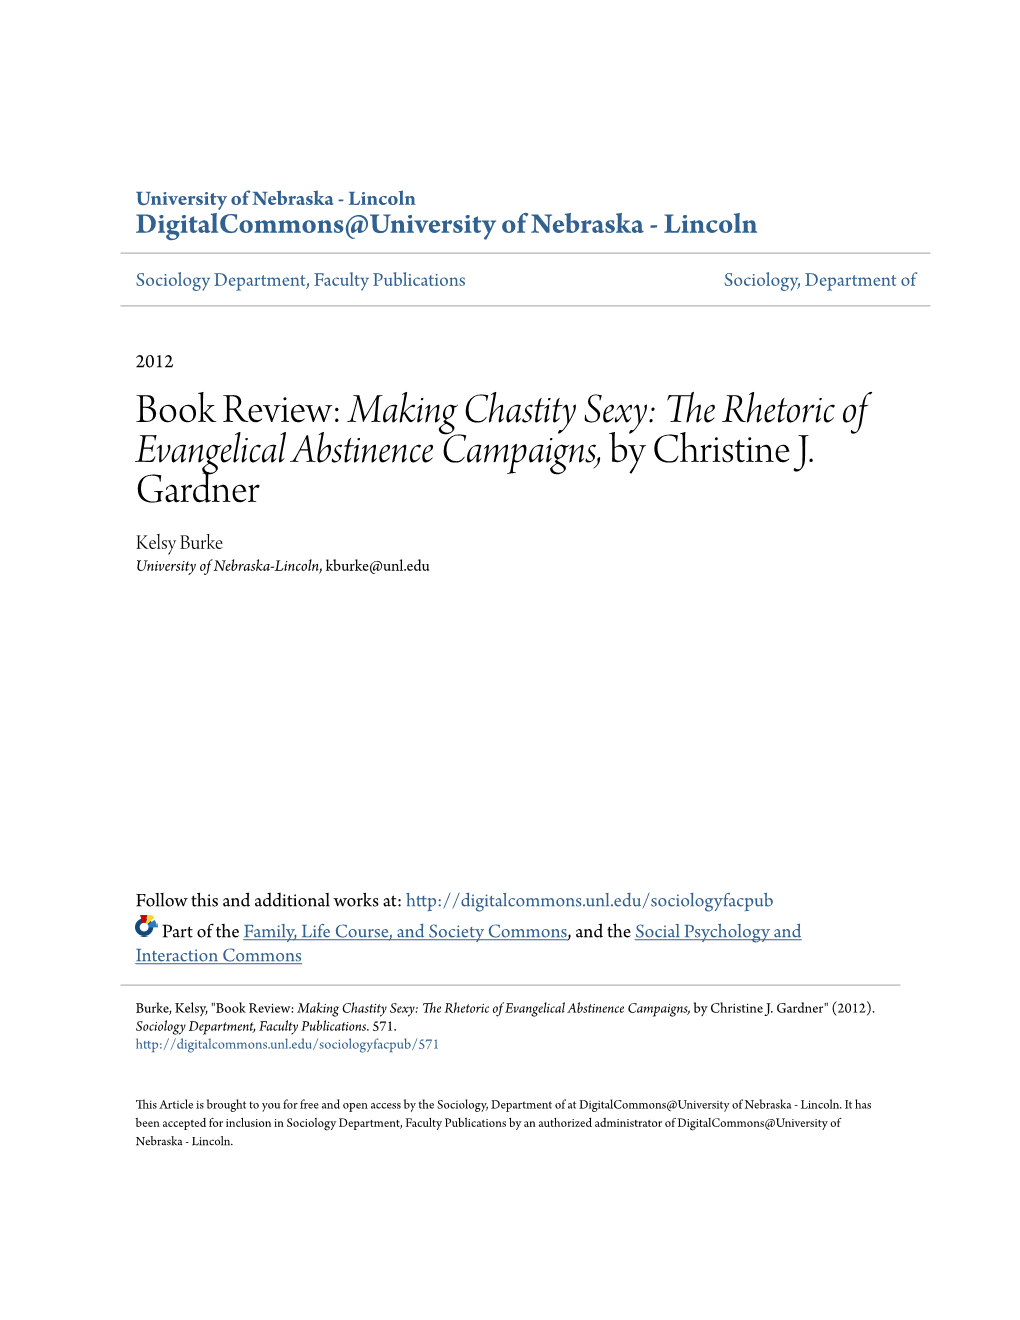 Making Chastity Sexy: the Rhetoric of Evangelical Abstinence Campaigns, by Christine J